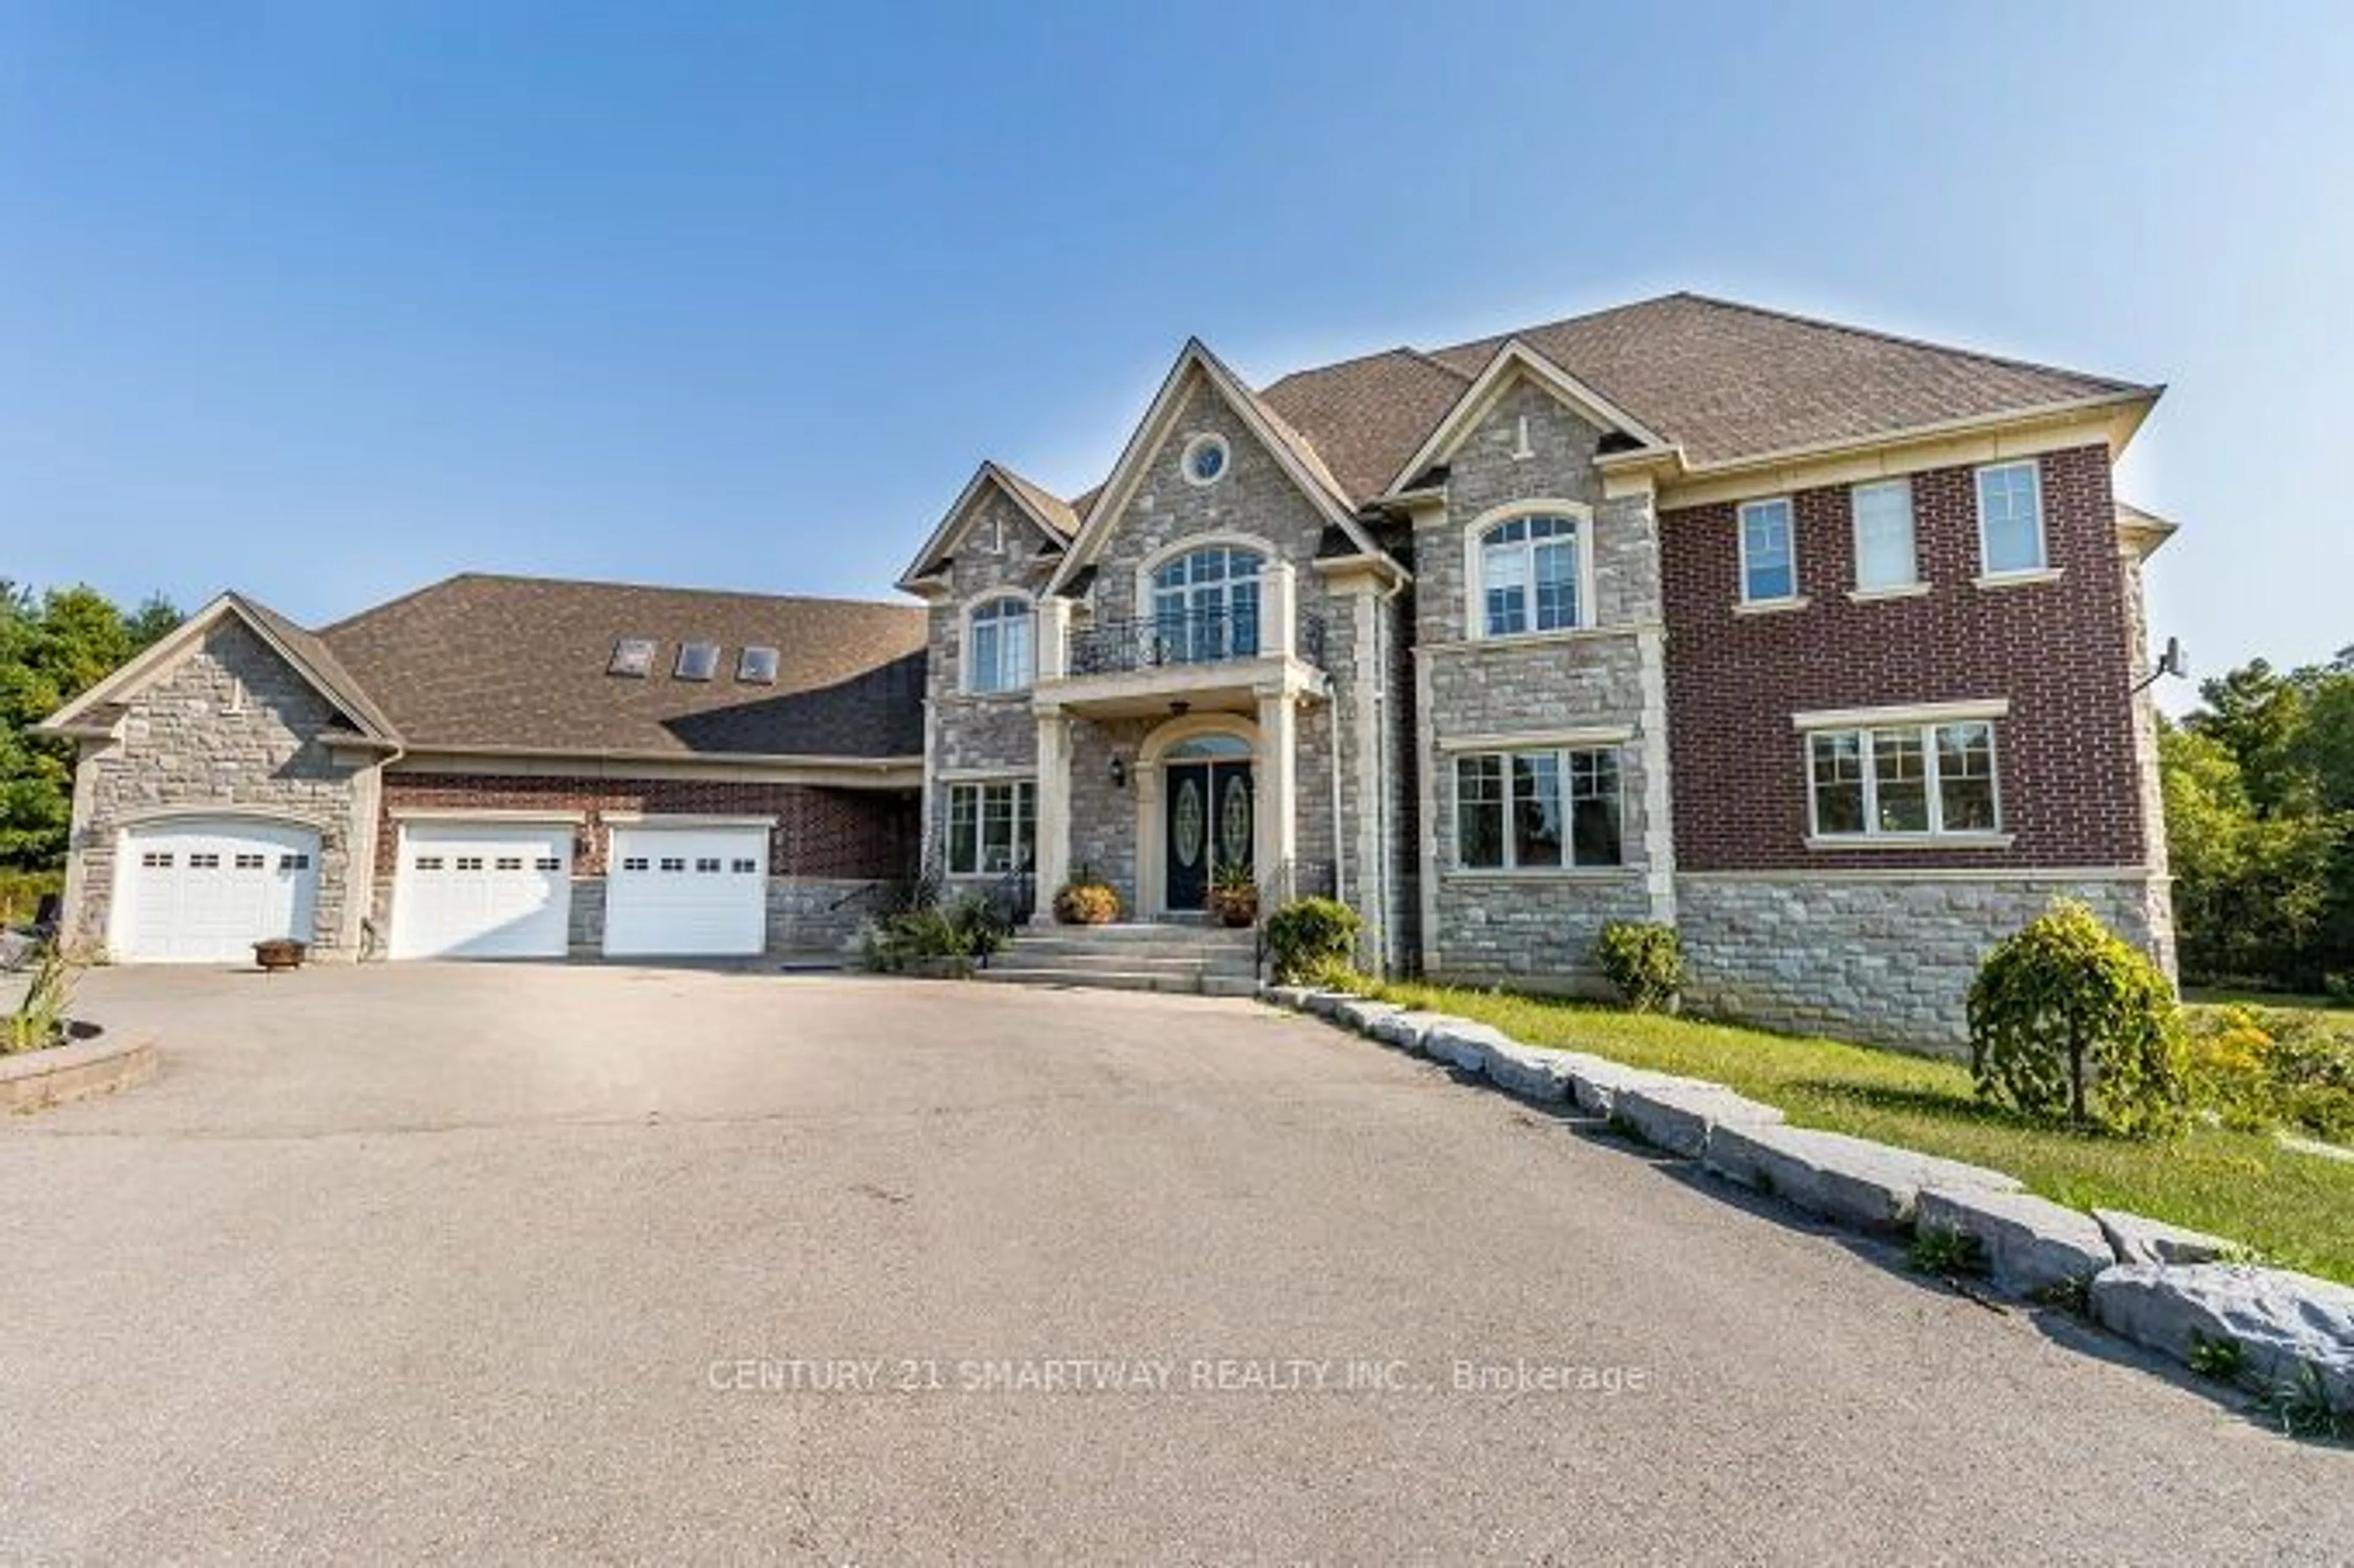 Frontside or backside of a home for 16045 Kennedy Rd, Caledon Ontario L7C 2H8